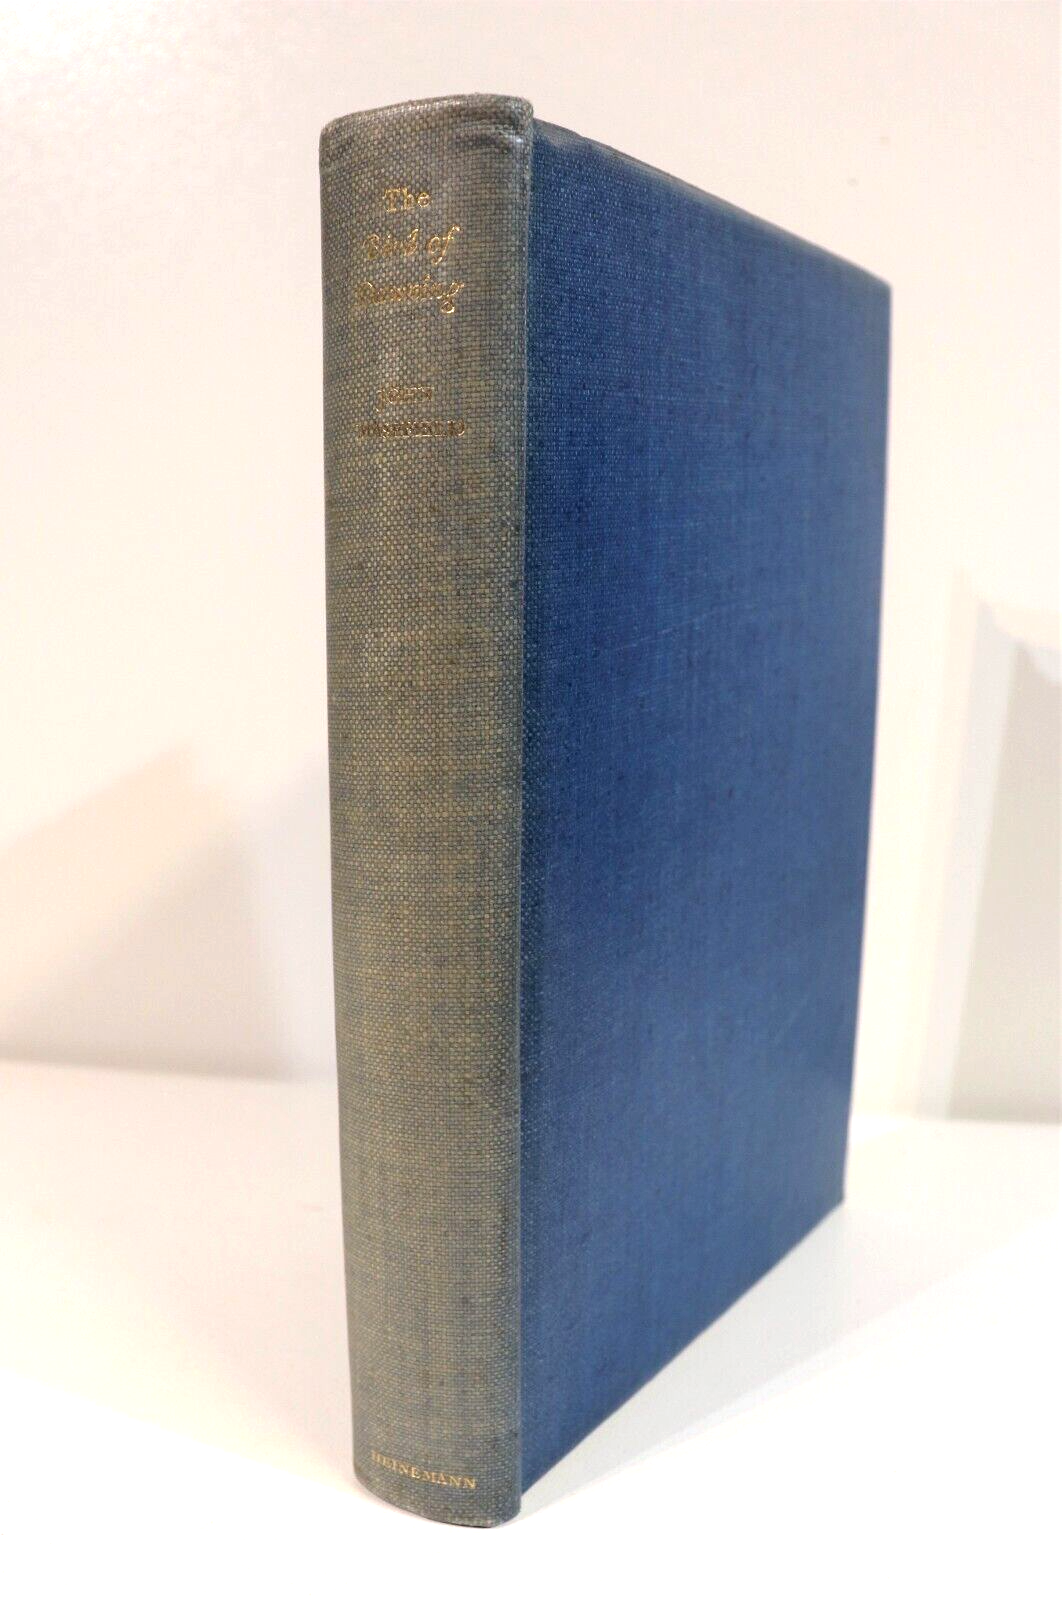 The Bird Of Dawning by John Masefield - 1933 - Ltd Ed. Signed by Author Book